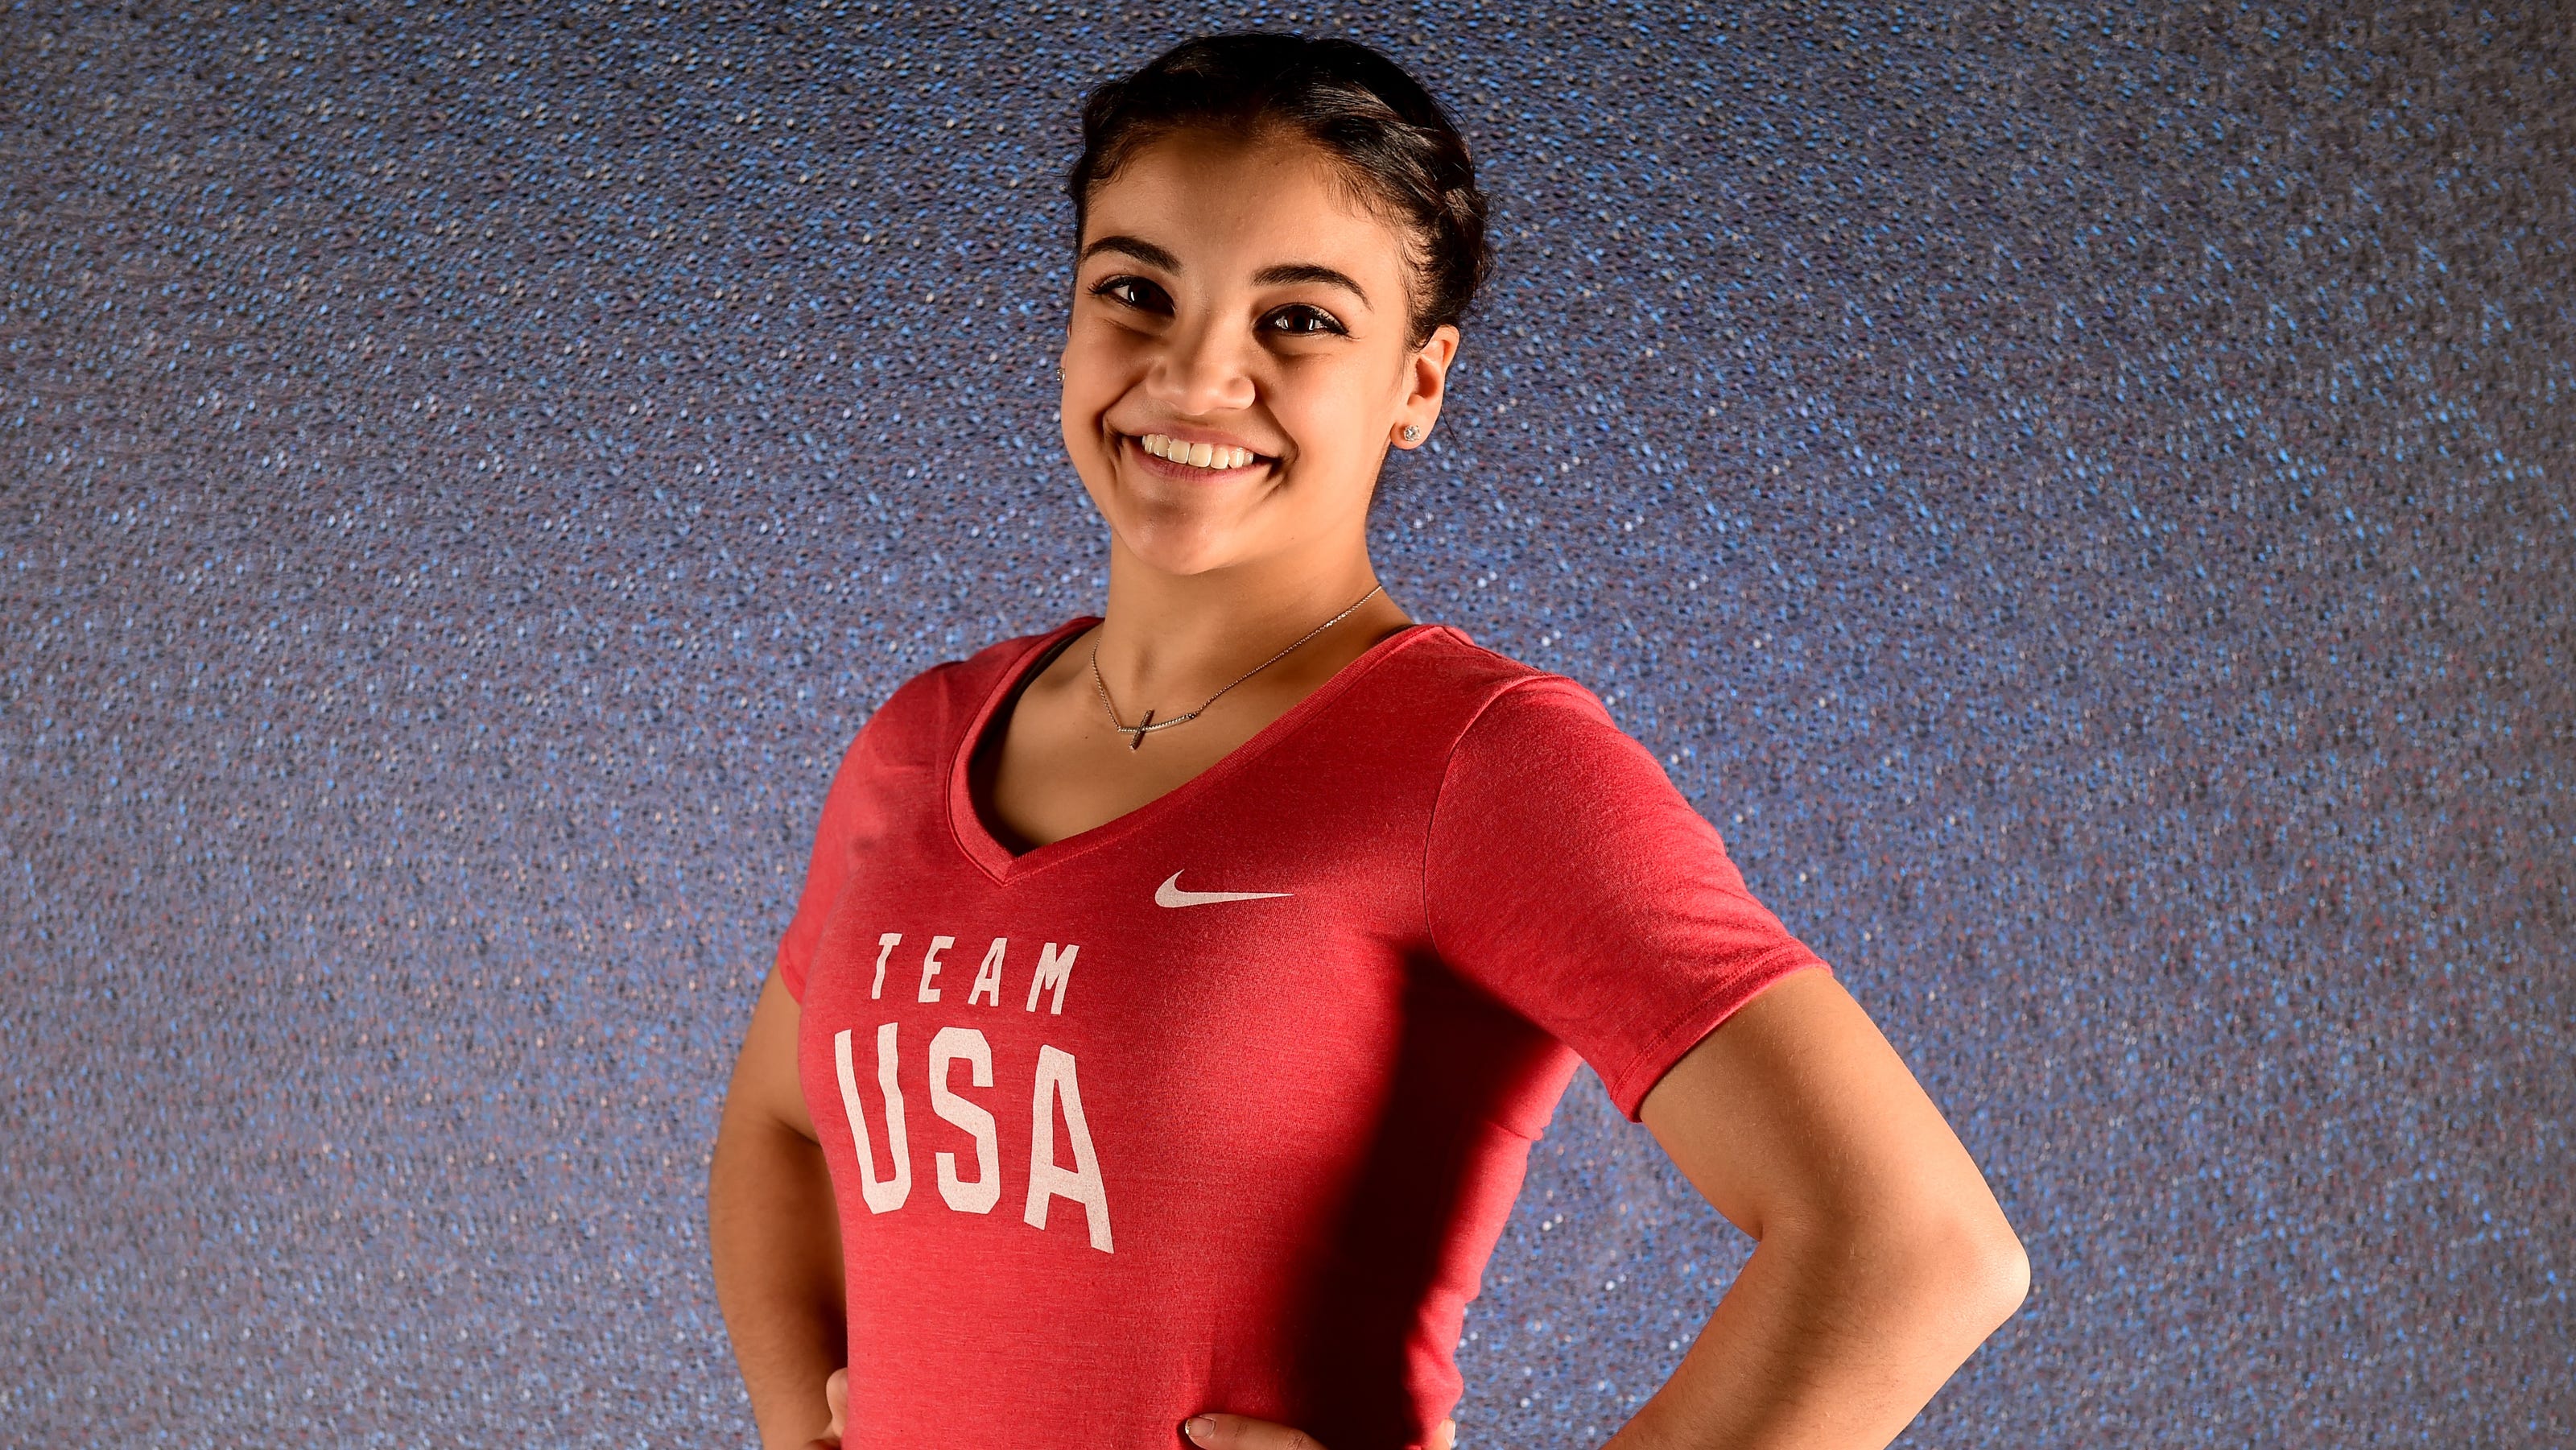 Laurie Hernandez is 'Changing the Game' by opening up and embraci...